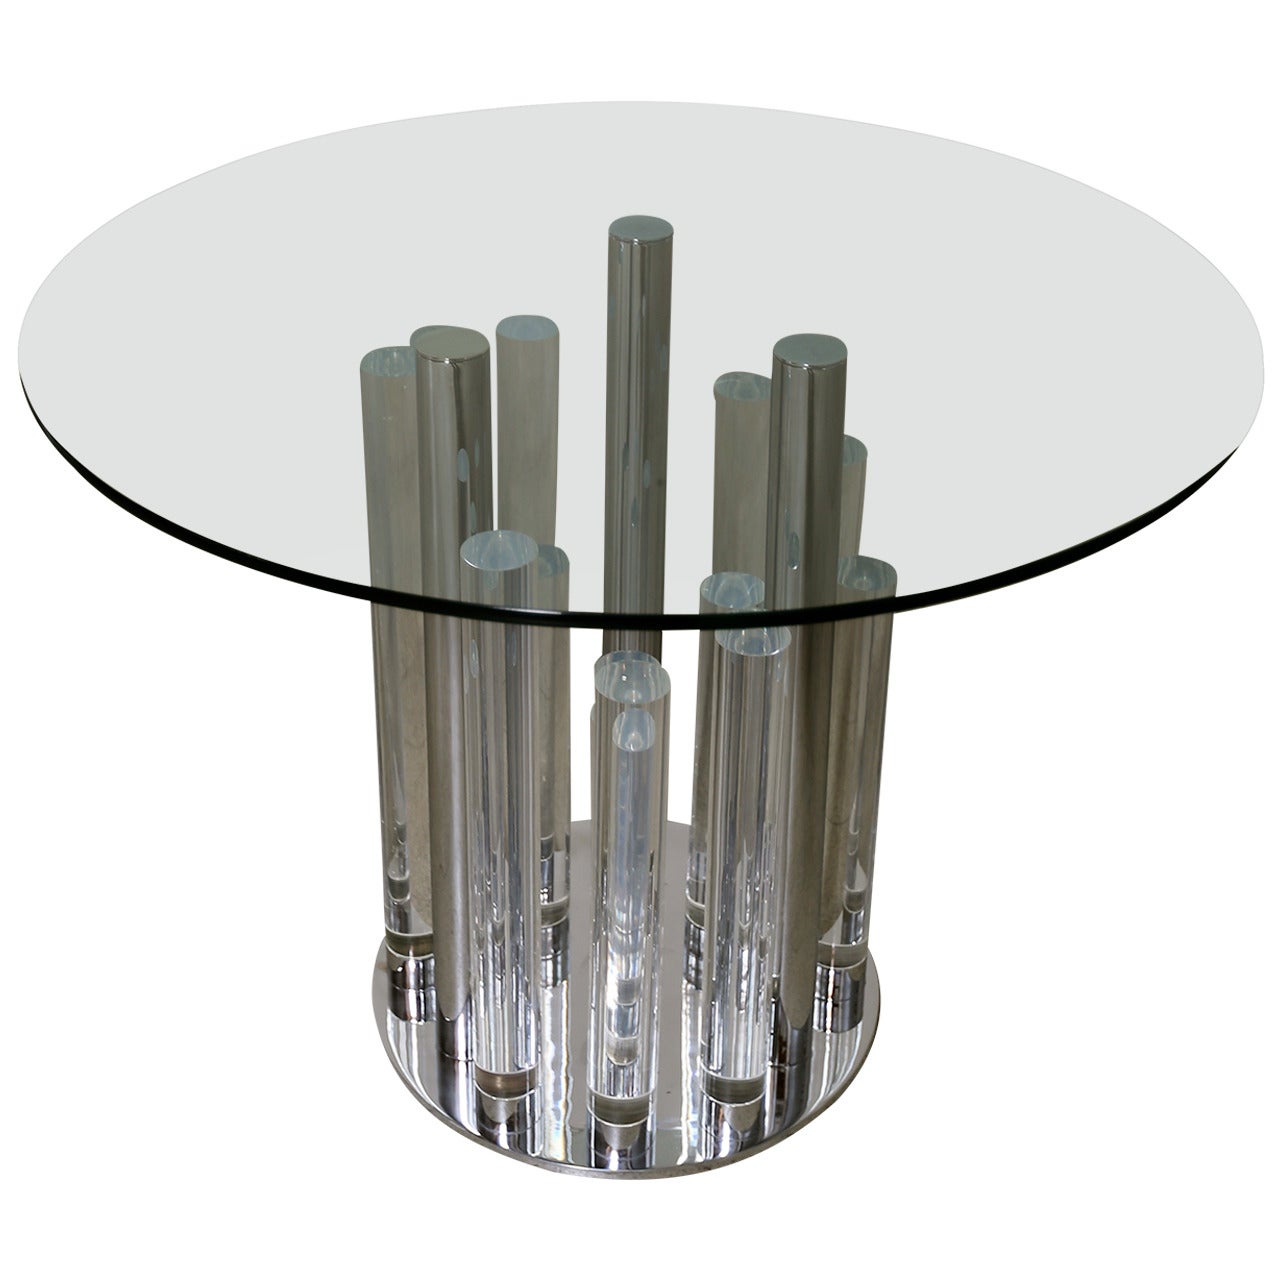 "Loretta Young" Lucite Dining Table by Charles Hollis Jones